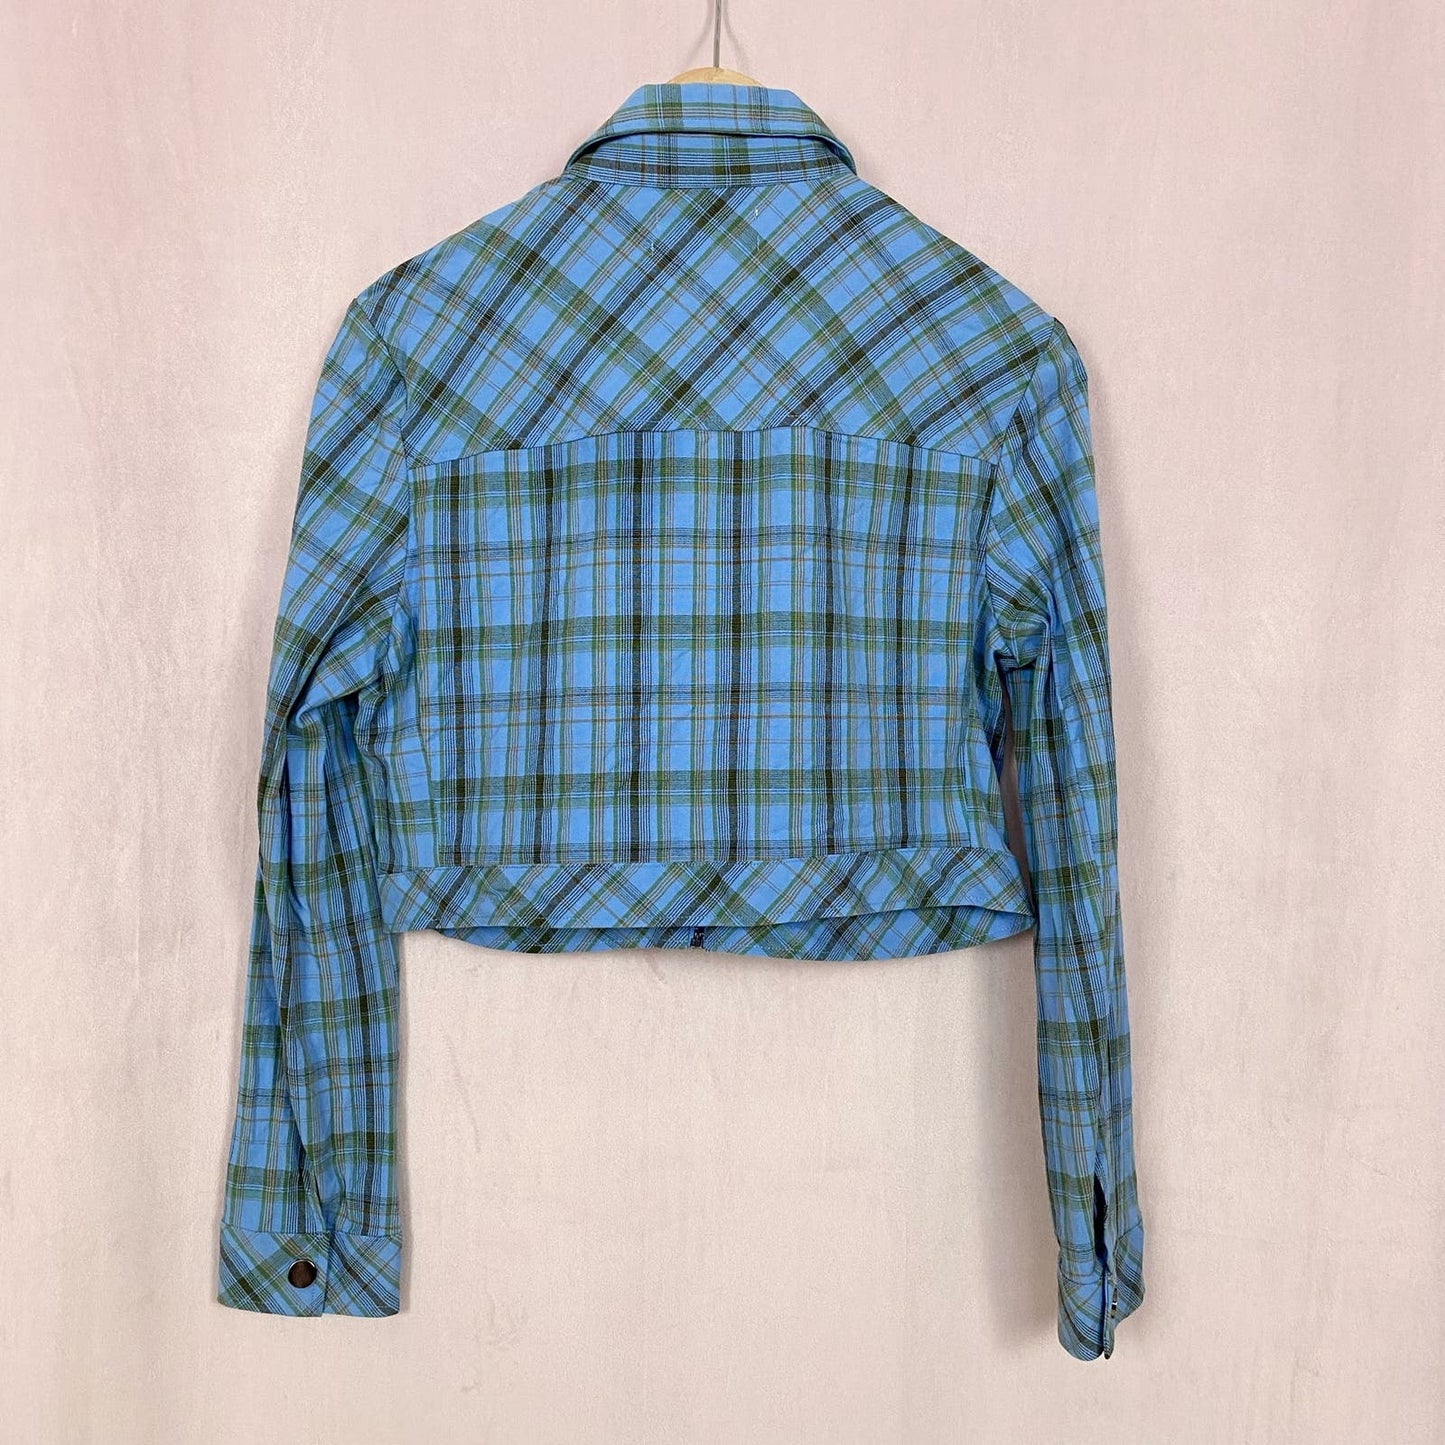 Secondhand Urban Outfitters Blue Plaid Zip Up Crop Jacket, Size Medium